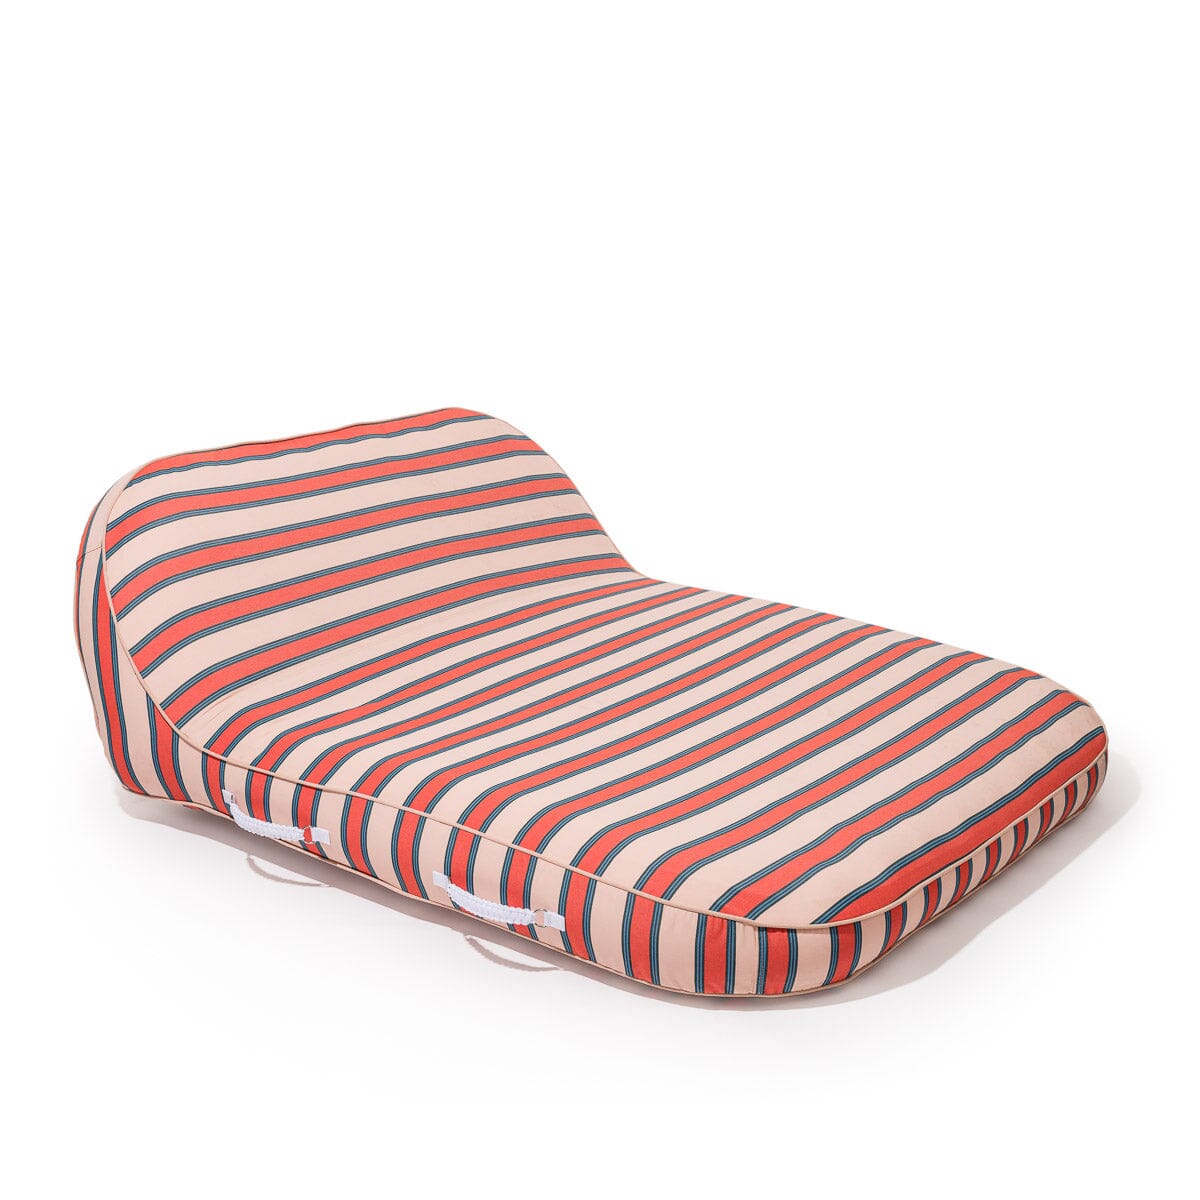 The XL Pool Lounger - Bistro Dusty Pink Stripe Pool Lounger Business & Pleasure Co 